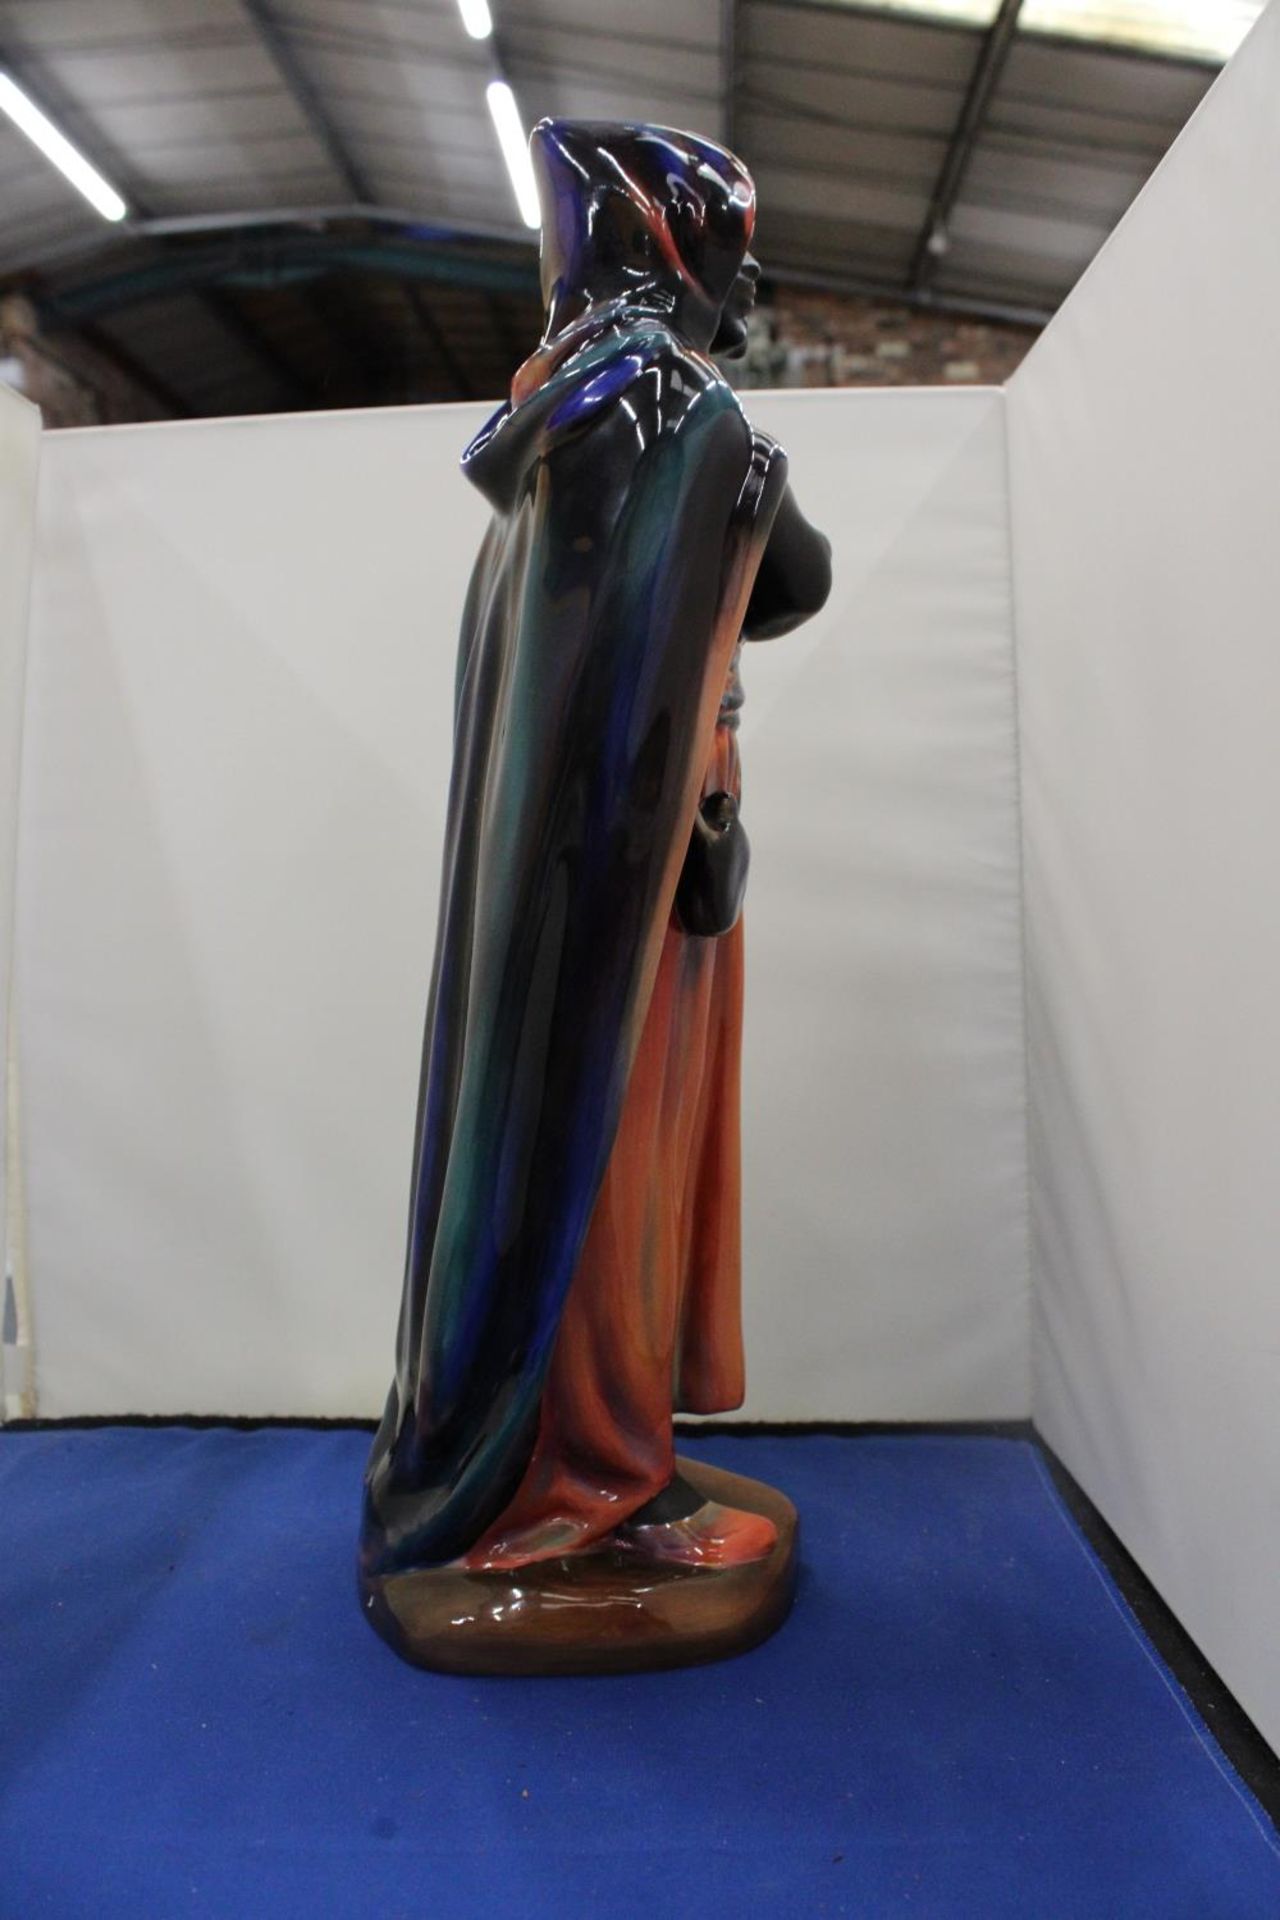 A ROYAL DOULTON FIGURE THE MOOR HN2082 SIGNED BY THE PAINTER D SMITH JAN 1998 - Image 4 of 6